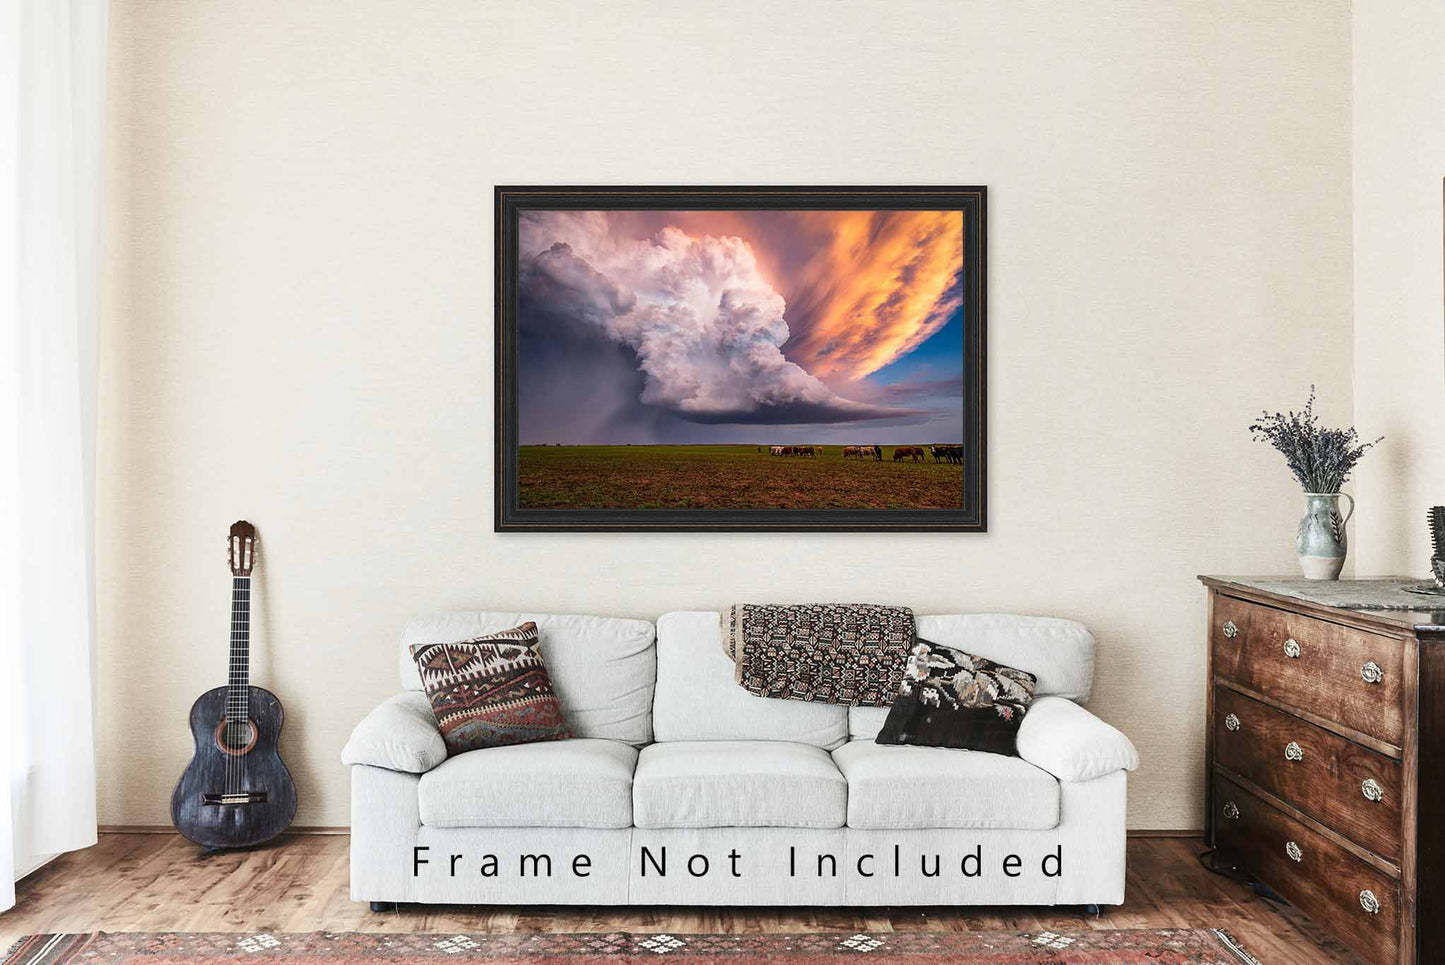 Storm Photography Print - Picture of Supercell Thunderstorm Over Field with Cows in Kansas - Weather Wall Art Photo Artwork Decor